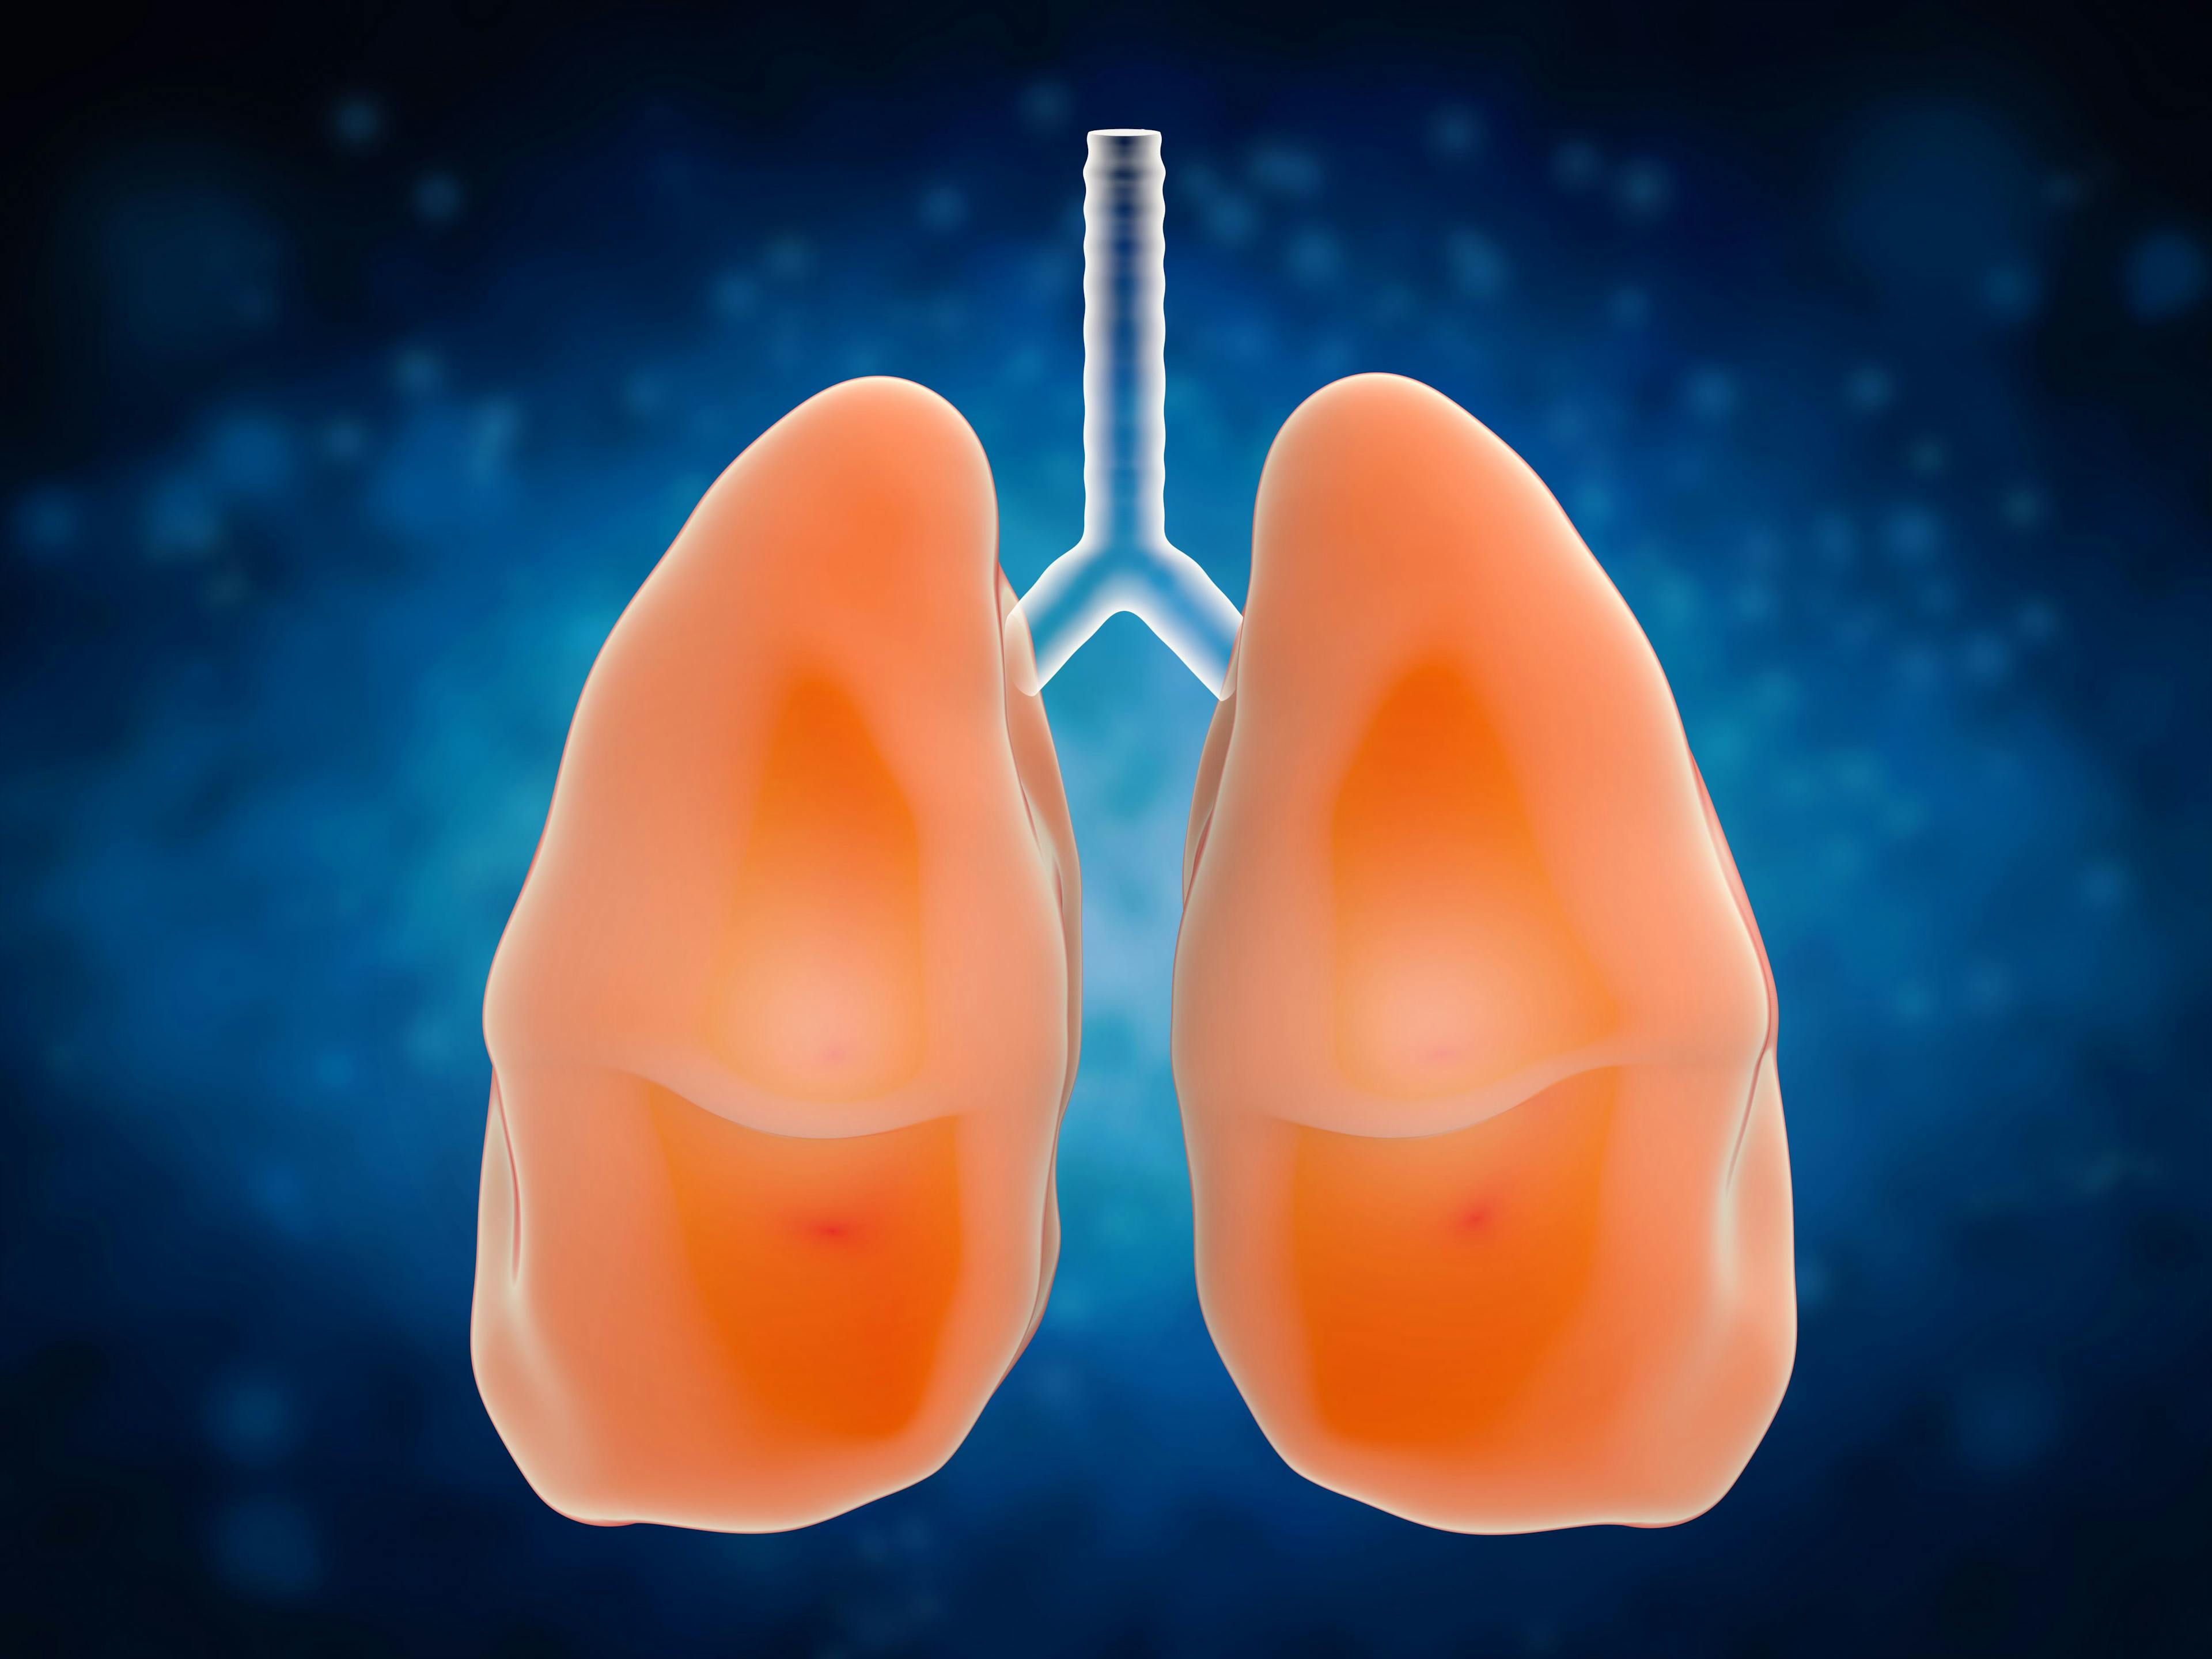 Keytruda Meets Trial Goals for Non-Small Cell Lung Cancer Treatment